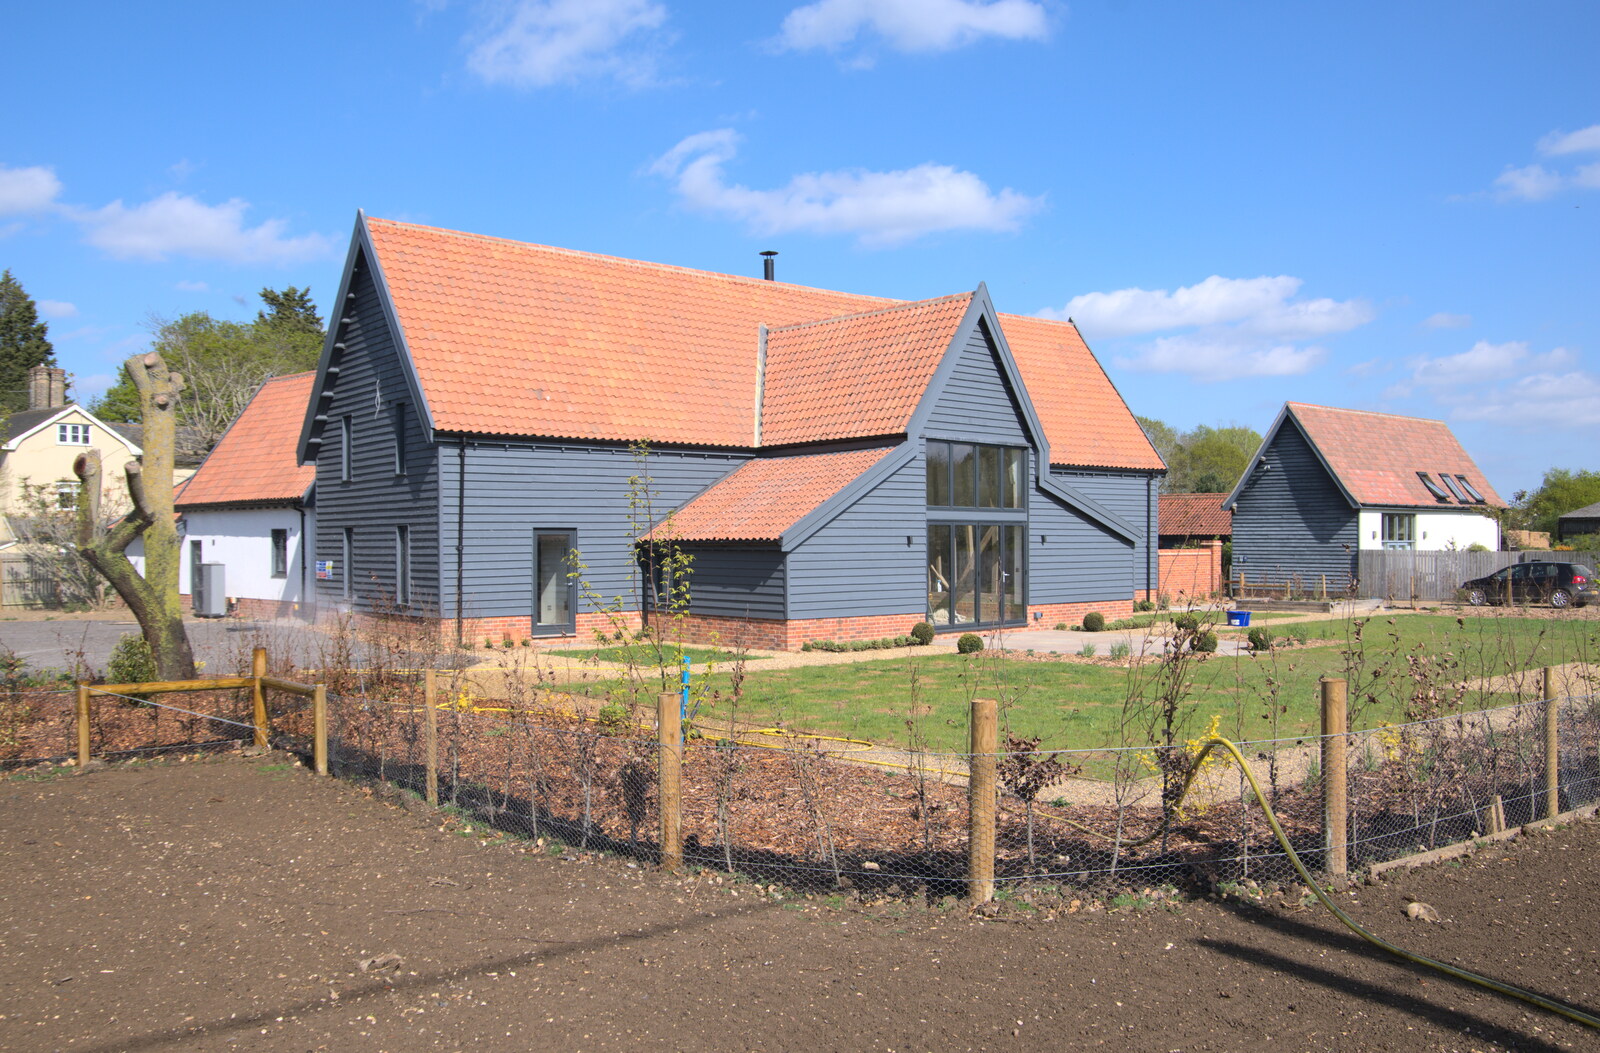 The converted barn near Church Farm from Lost Cat and a Walk on Nick's Lane, Brome, Suffolk - 26th April 2020